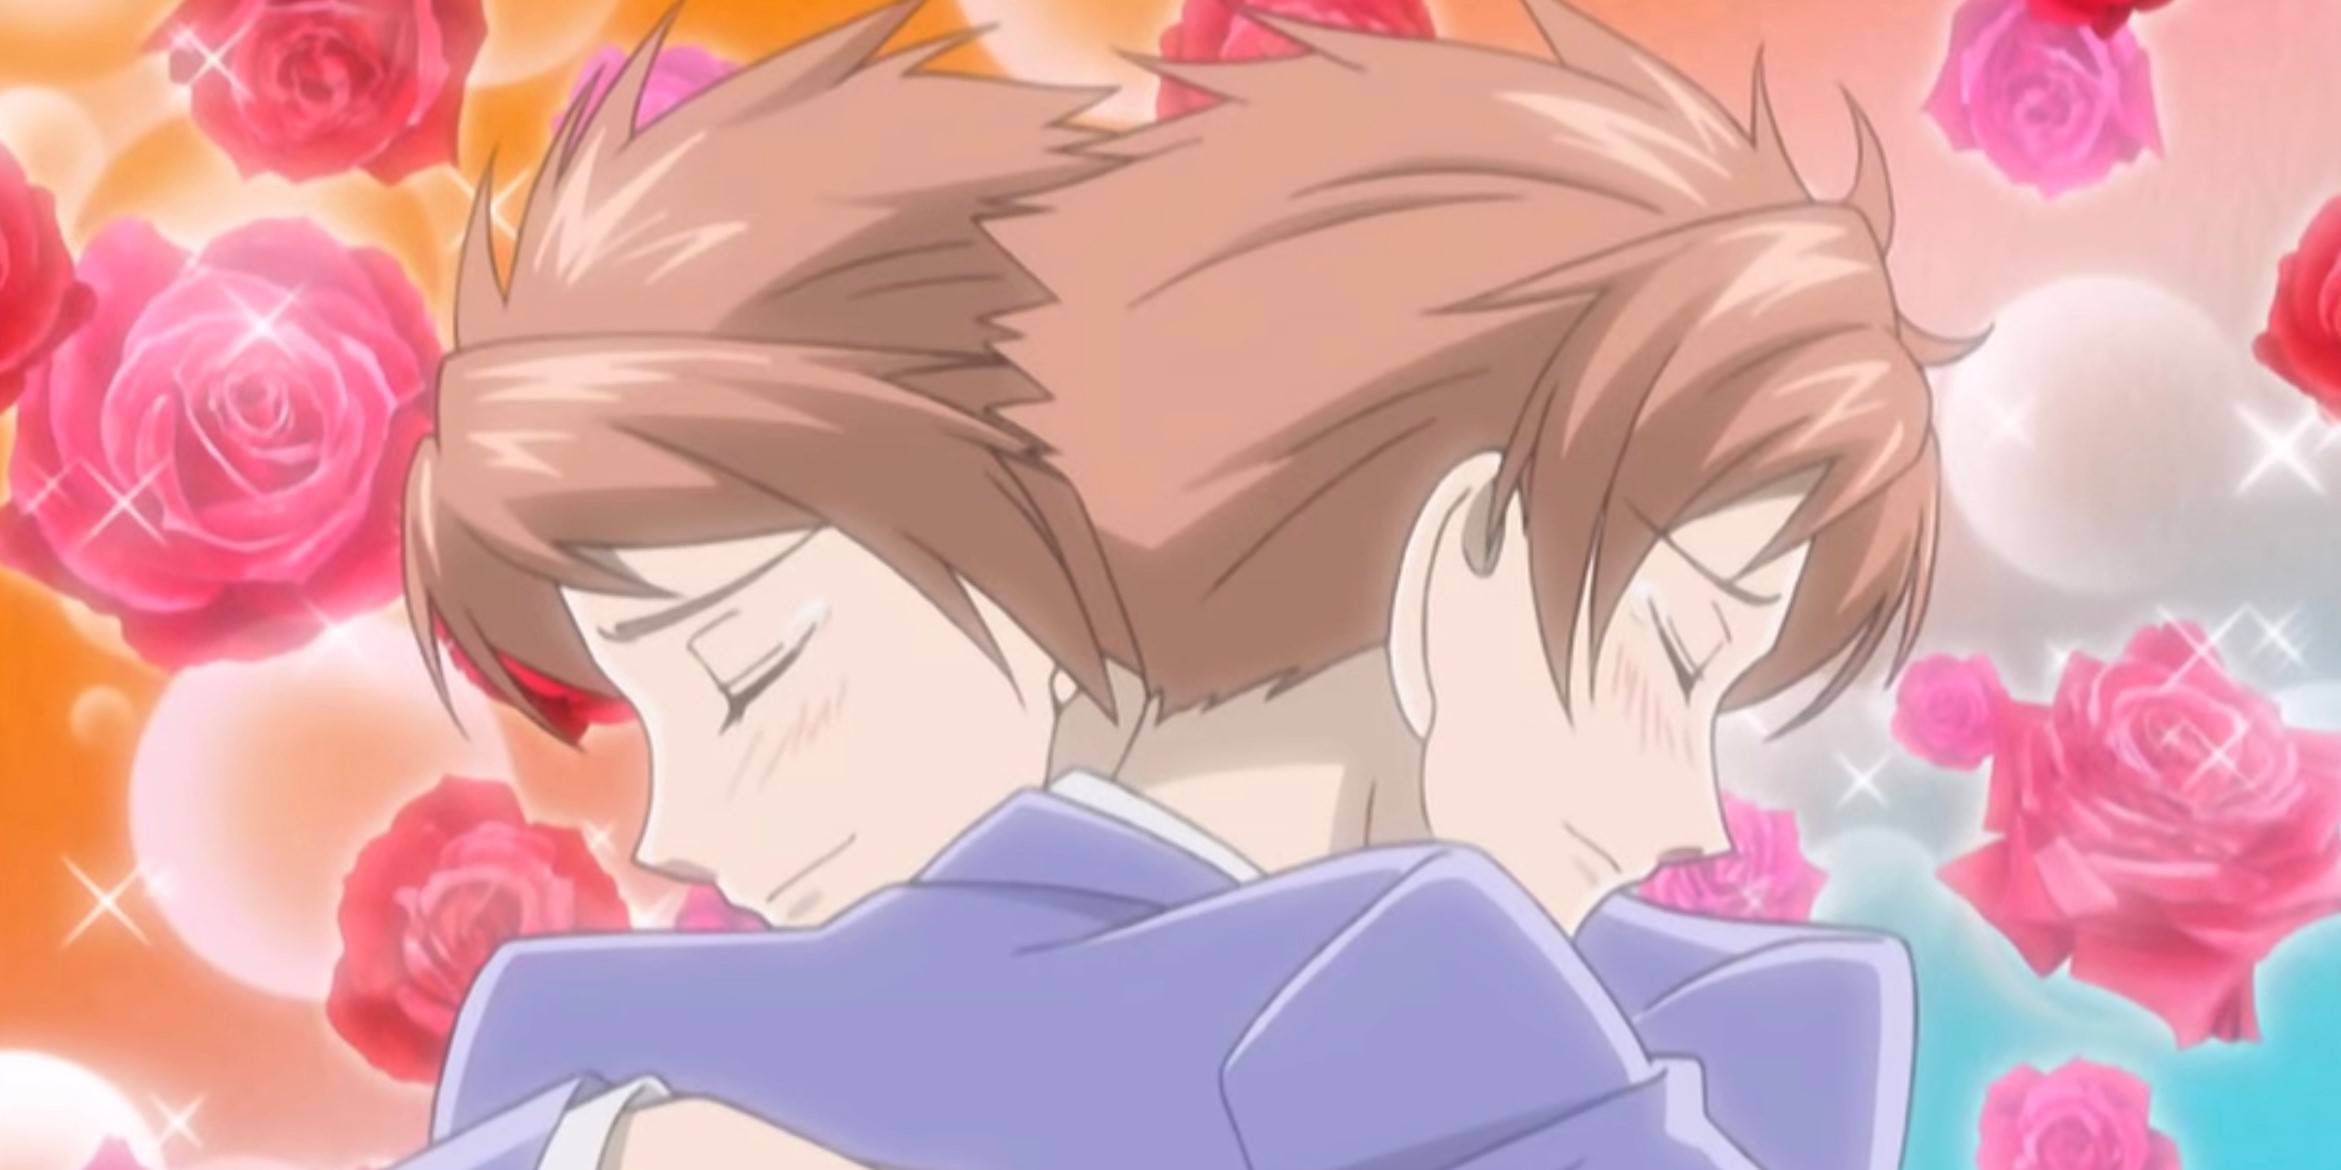 Is ouran host club gay